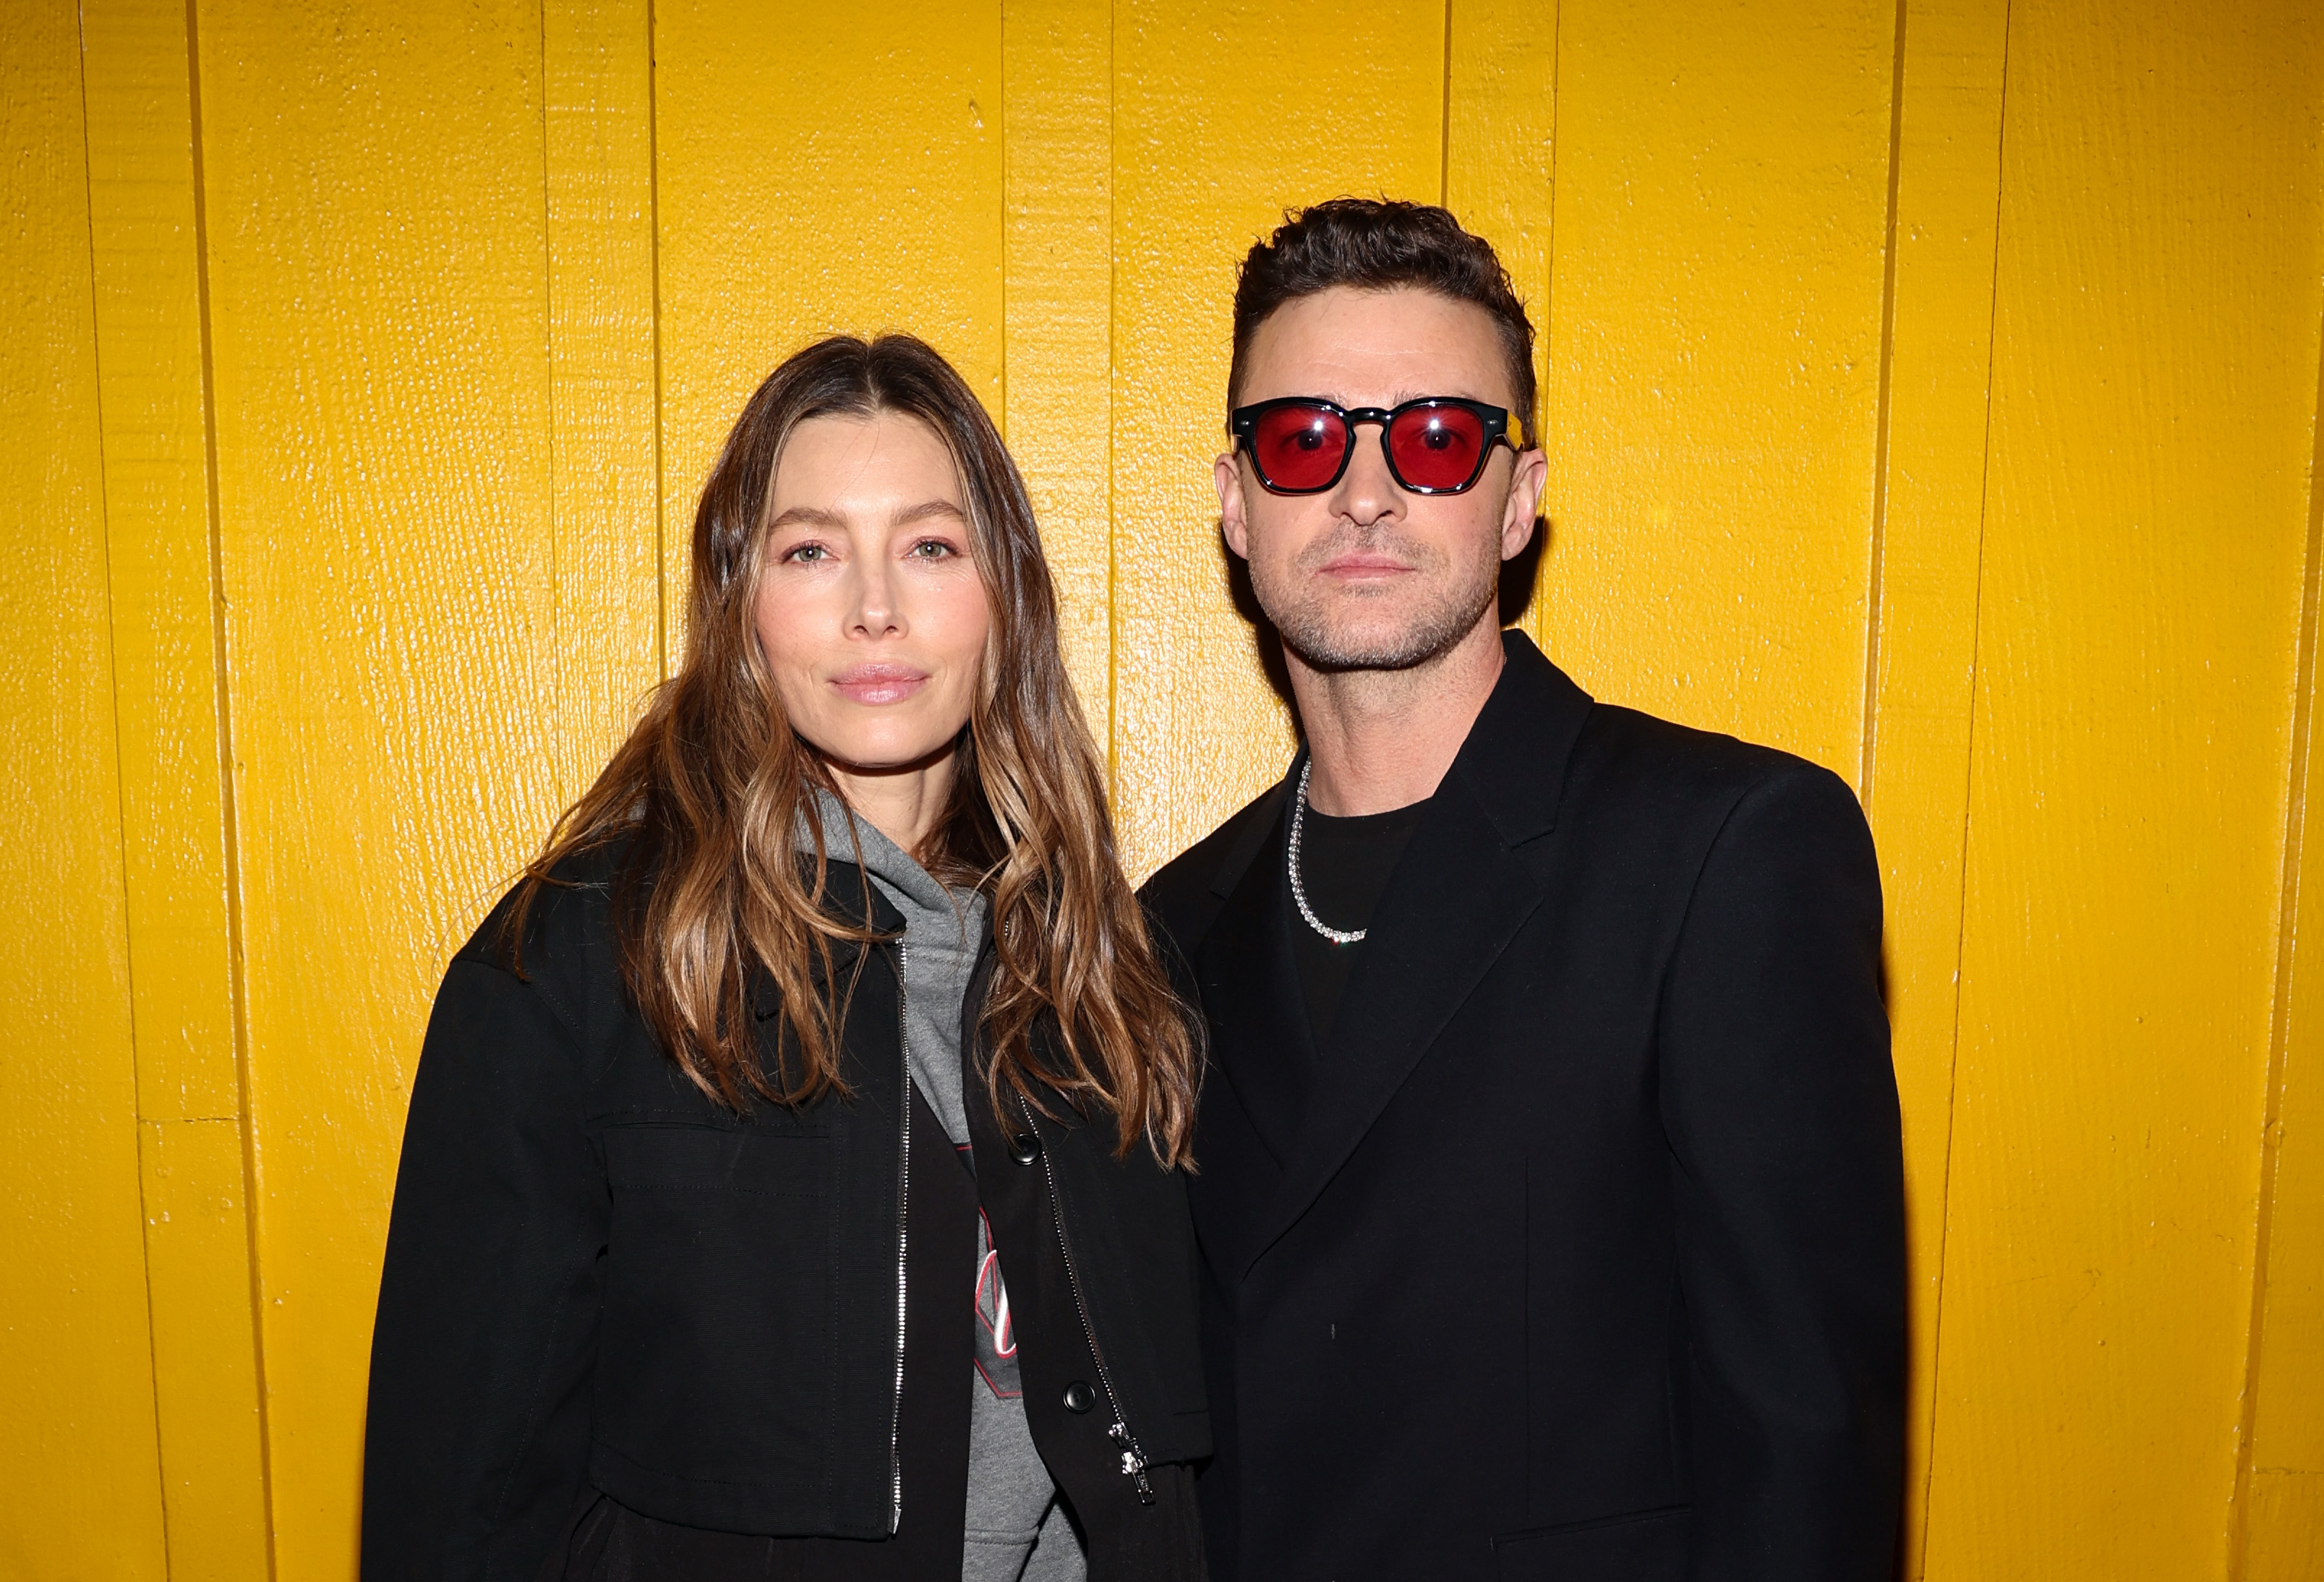 Jessica Biel, in casual wear, and Justin Timberlake, in a trendy black jacket and red sunglasses, pose together against a yellow background